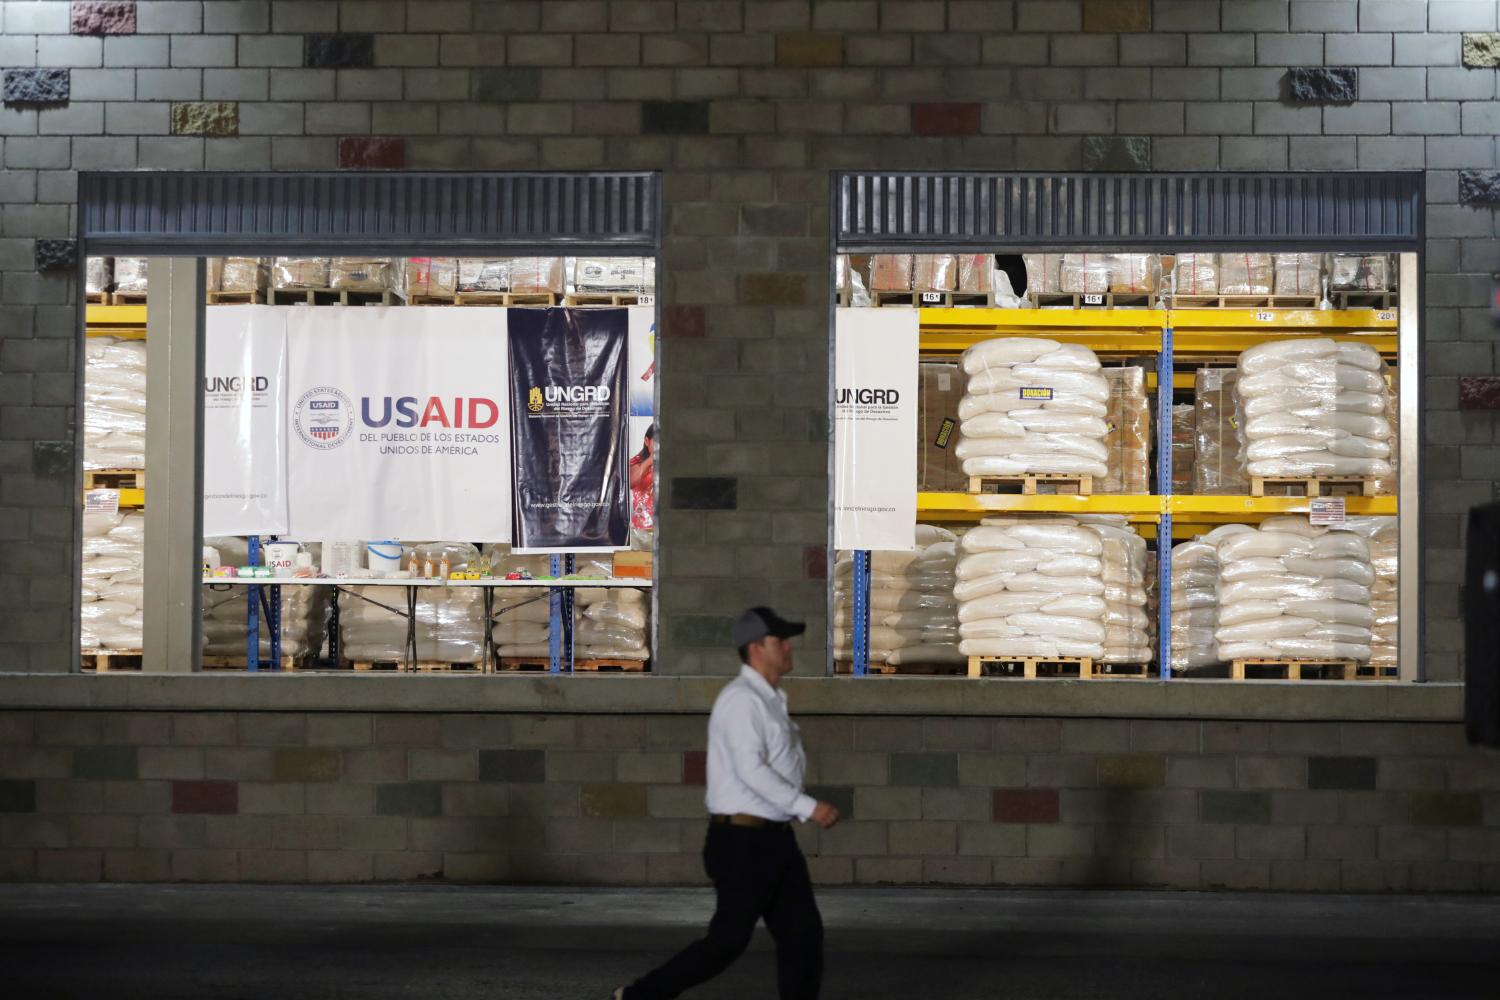 A view shows aid at a warehouse where international humanitarian aid for Venezuela is being stored, during a visit by U.S. Secretary of State Mike Pompeo and Colombia’s President Ivan Duque, near the La Unidad cross-border bridge between Colombia and Venezuela in Cucuta, Colombia April 14, 2019. REUTERS/Luisa Gonzalez 